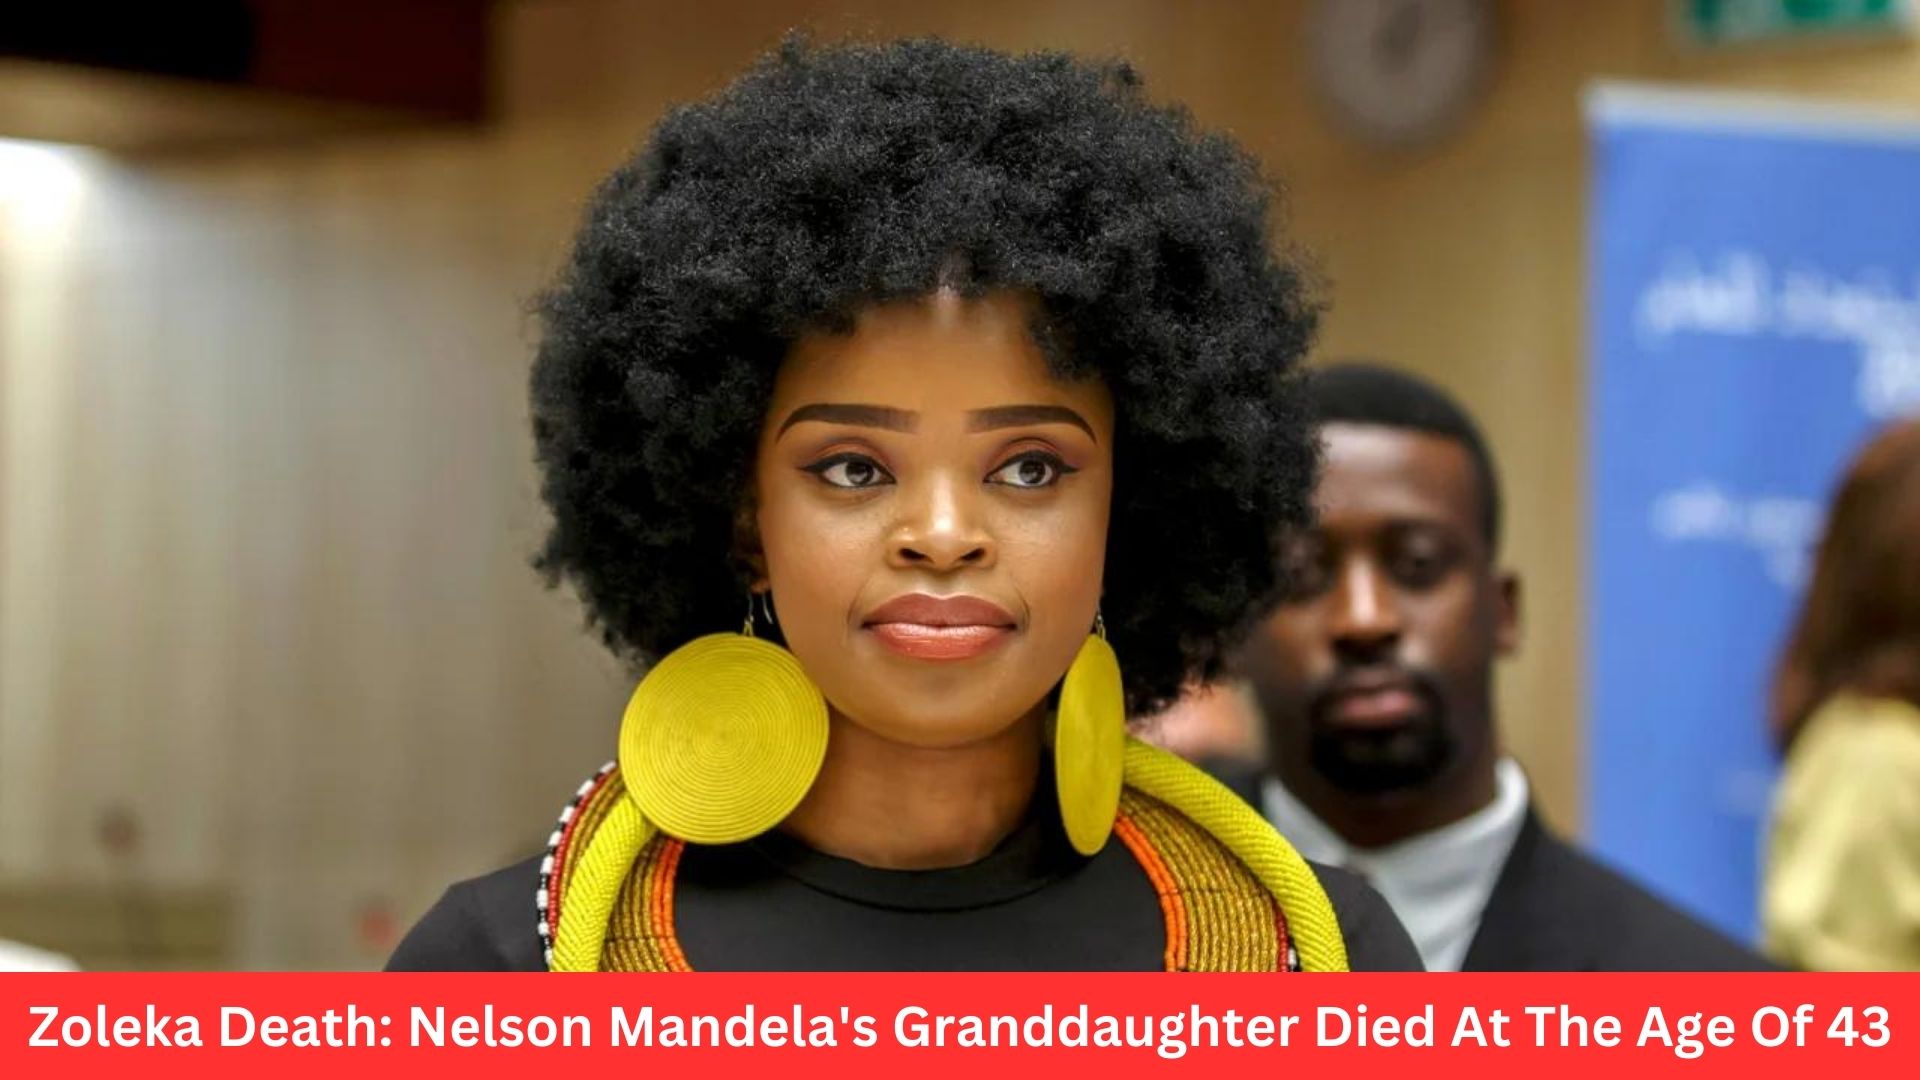 Zoleka Death: Nelson Mandela's Granddaughter Died At The Age Of 43